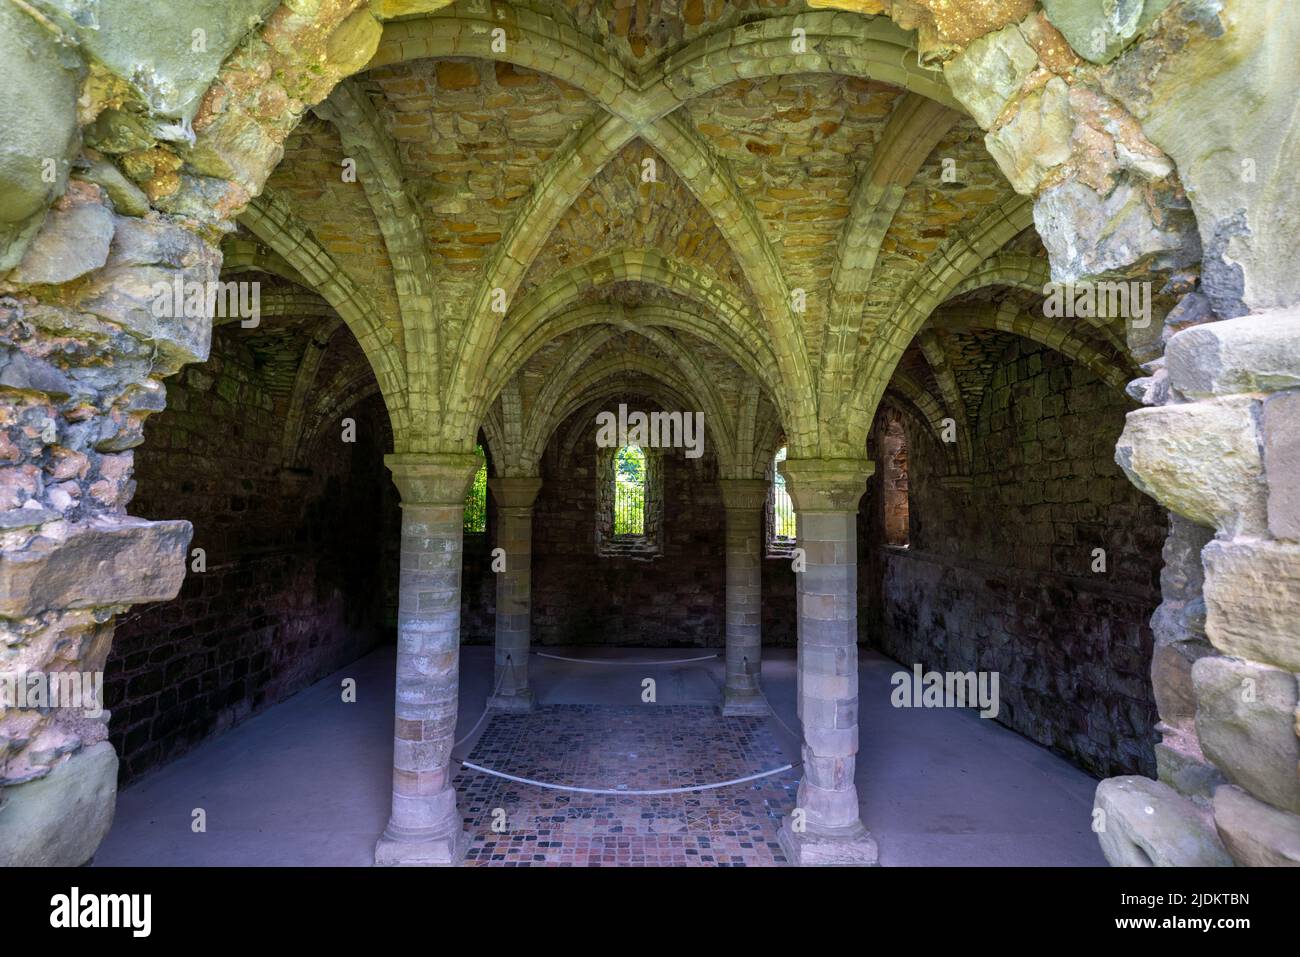 Vaulted and tile-floored chapter house at Buildwas Abbey in Shropshire England Stock Photo